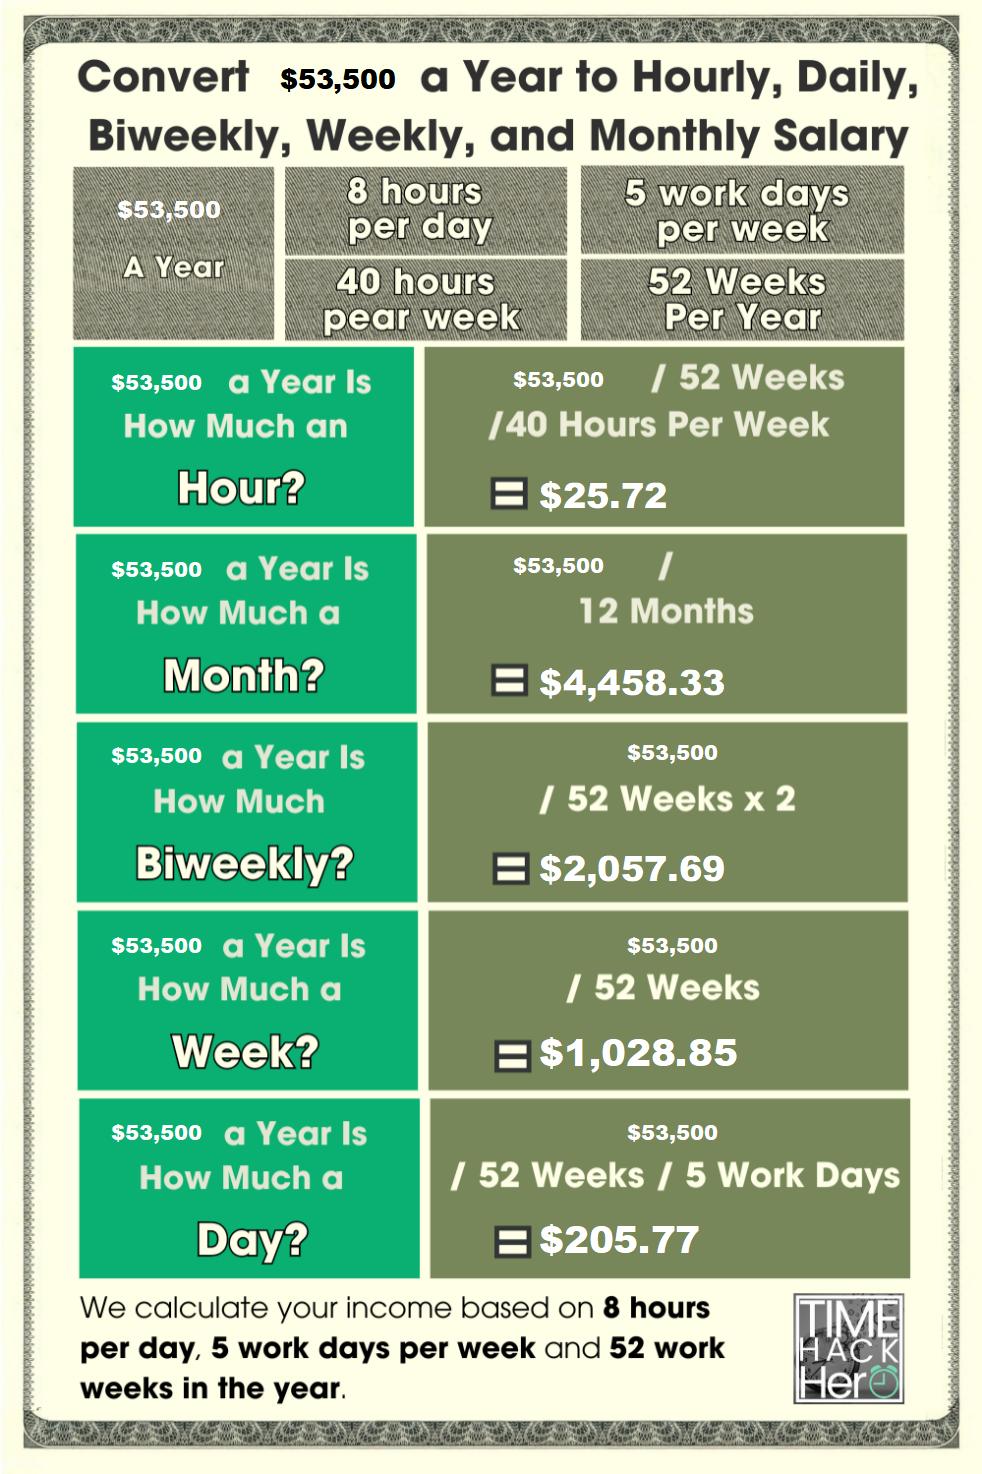 Convert $53500 a Year to Hourly, Daily, Biweekly, Weekly, and Monthly Salary